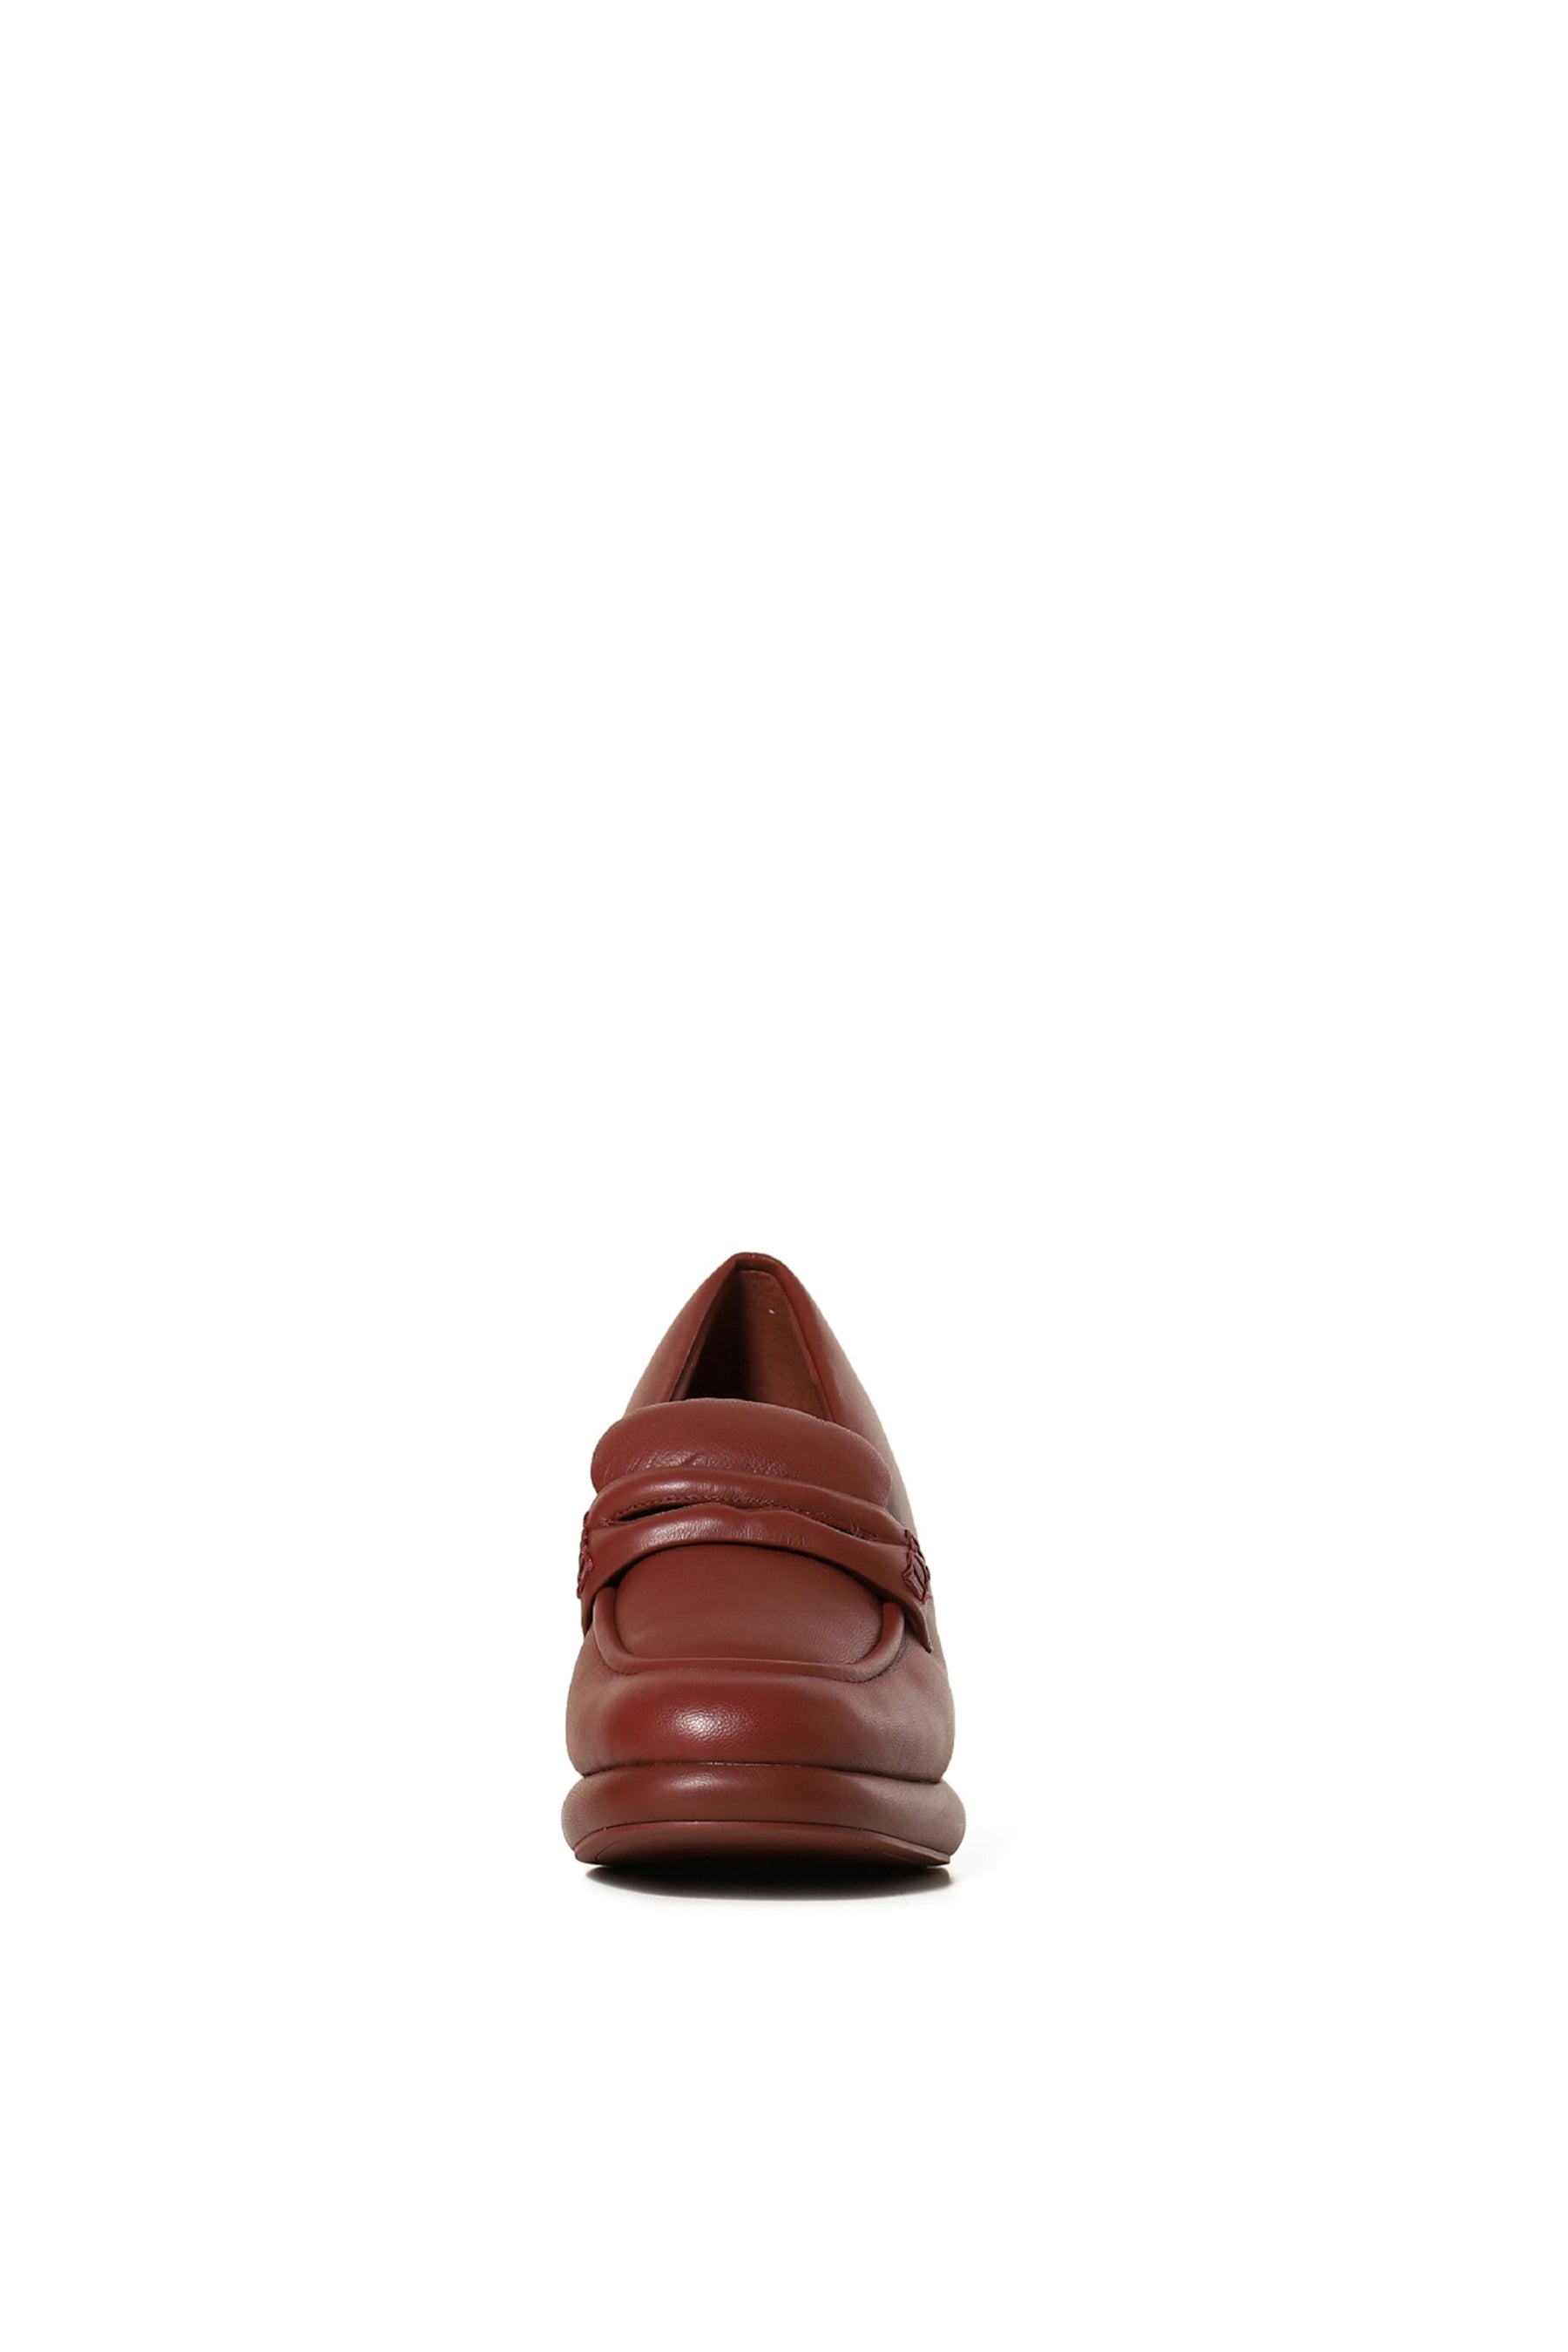 THE LOAFER1 / OX-BLOOD LEATHER